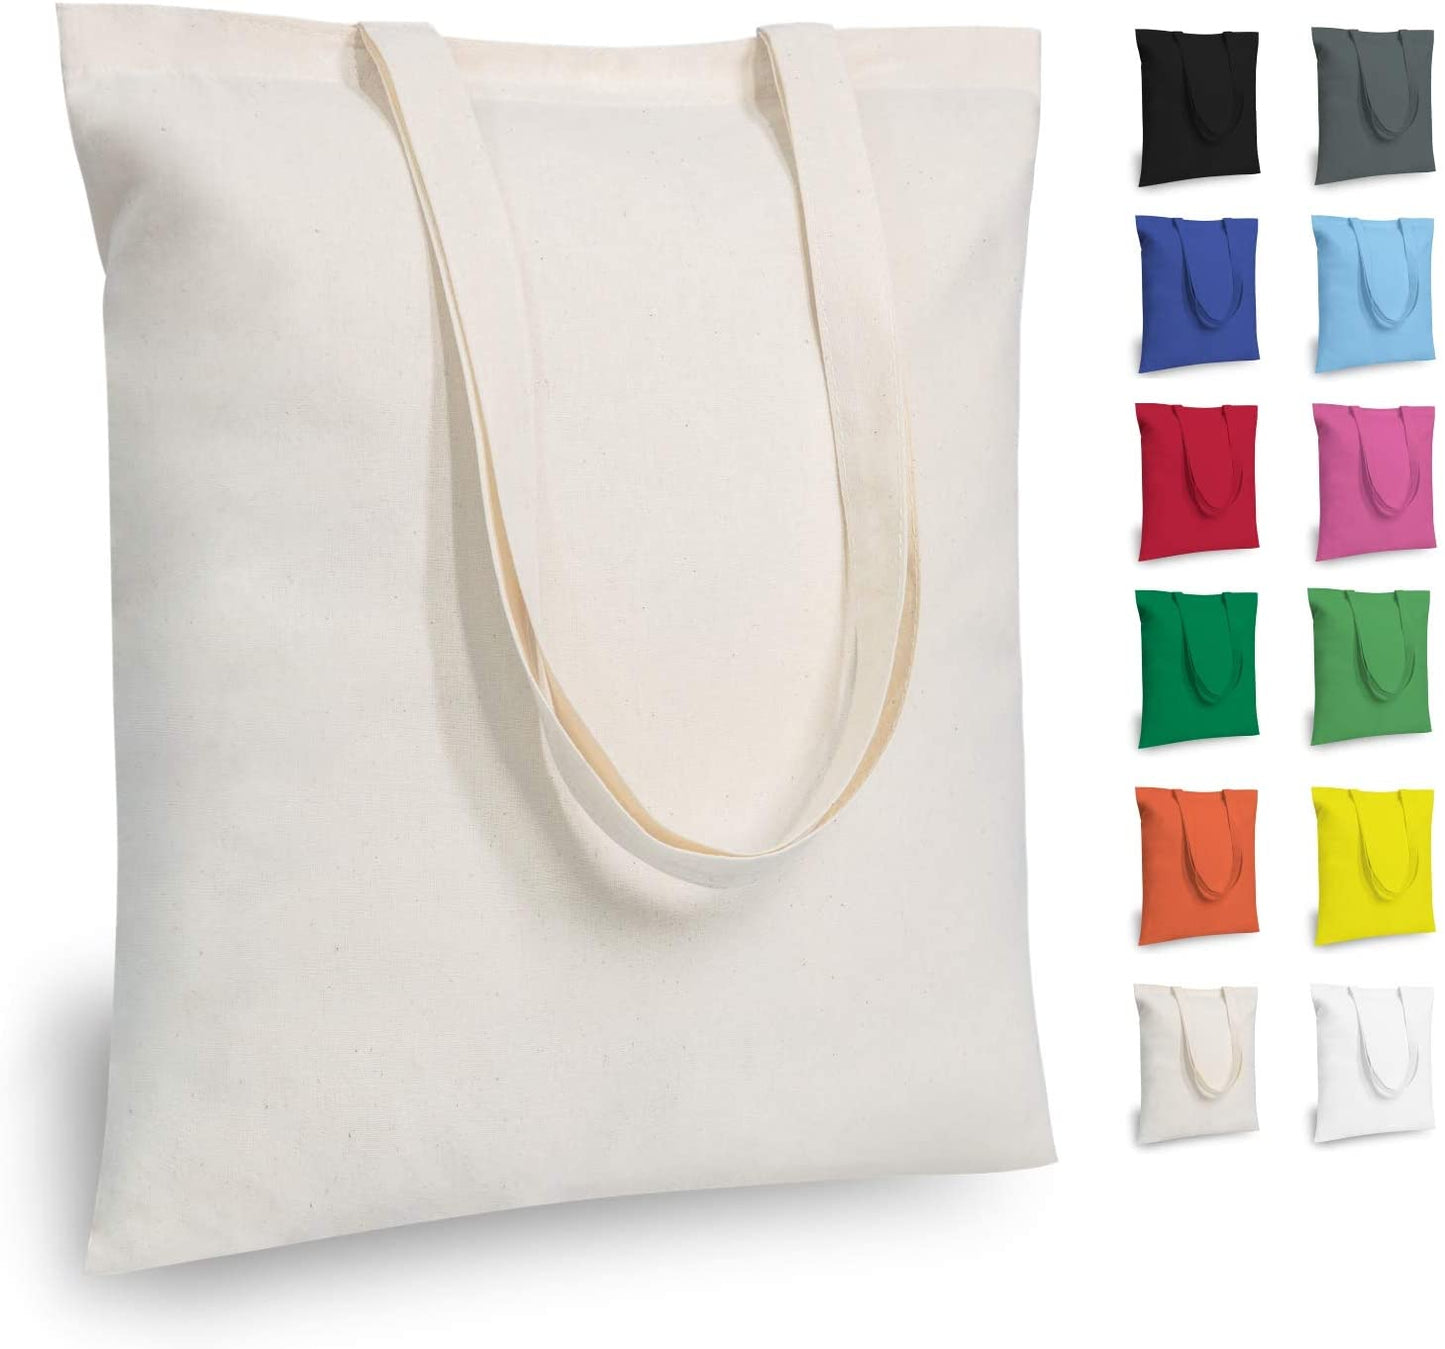 Custom Design Blank Promotional Cotton Canvas Tote Bags SB-001